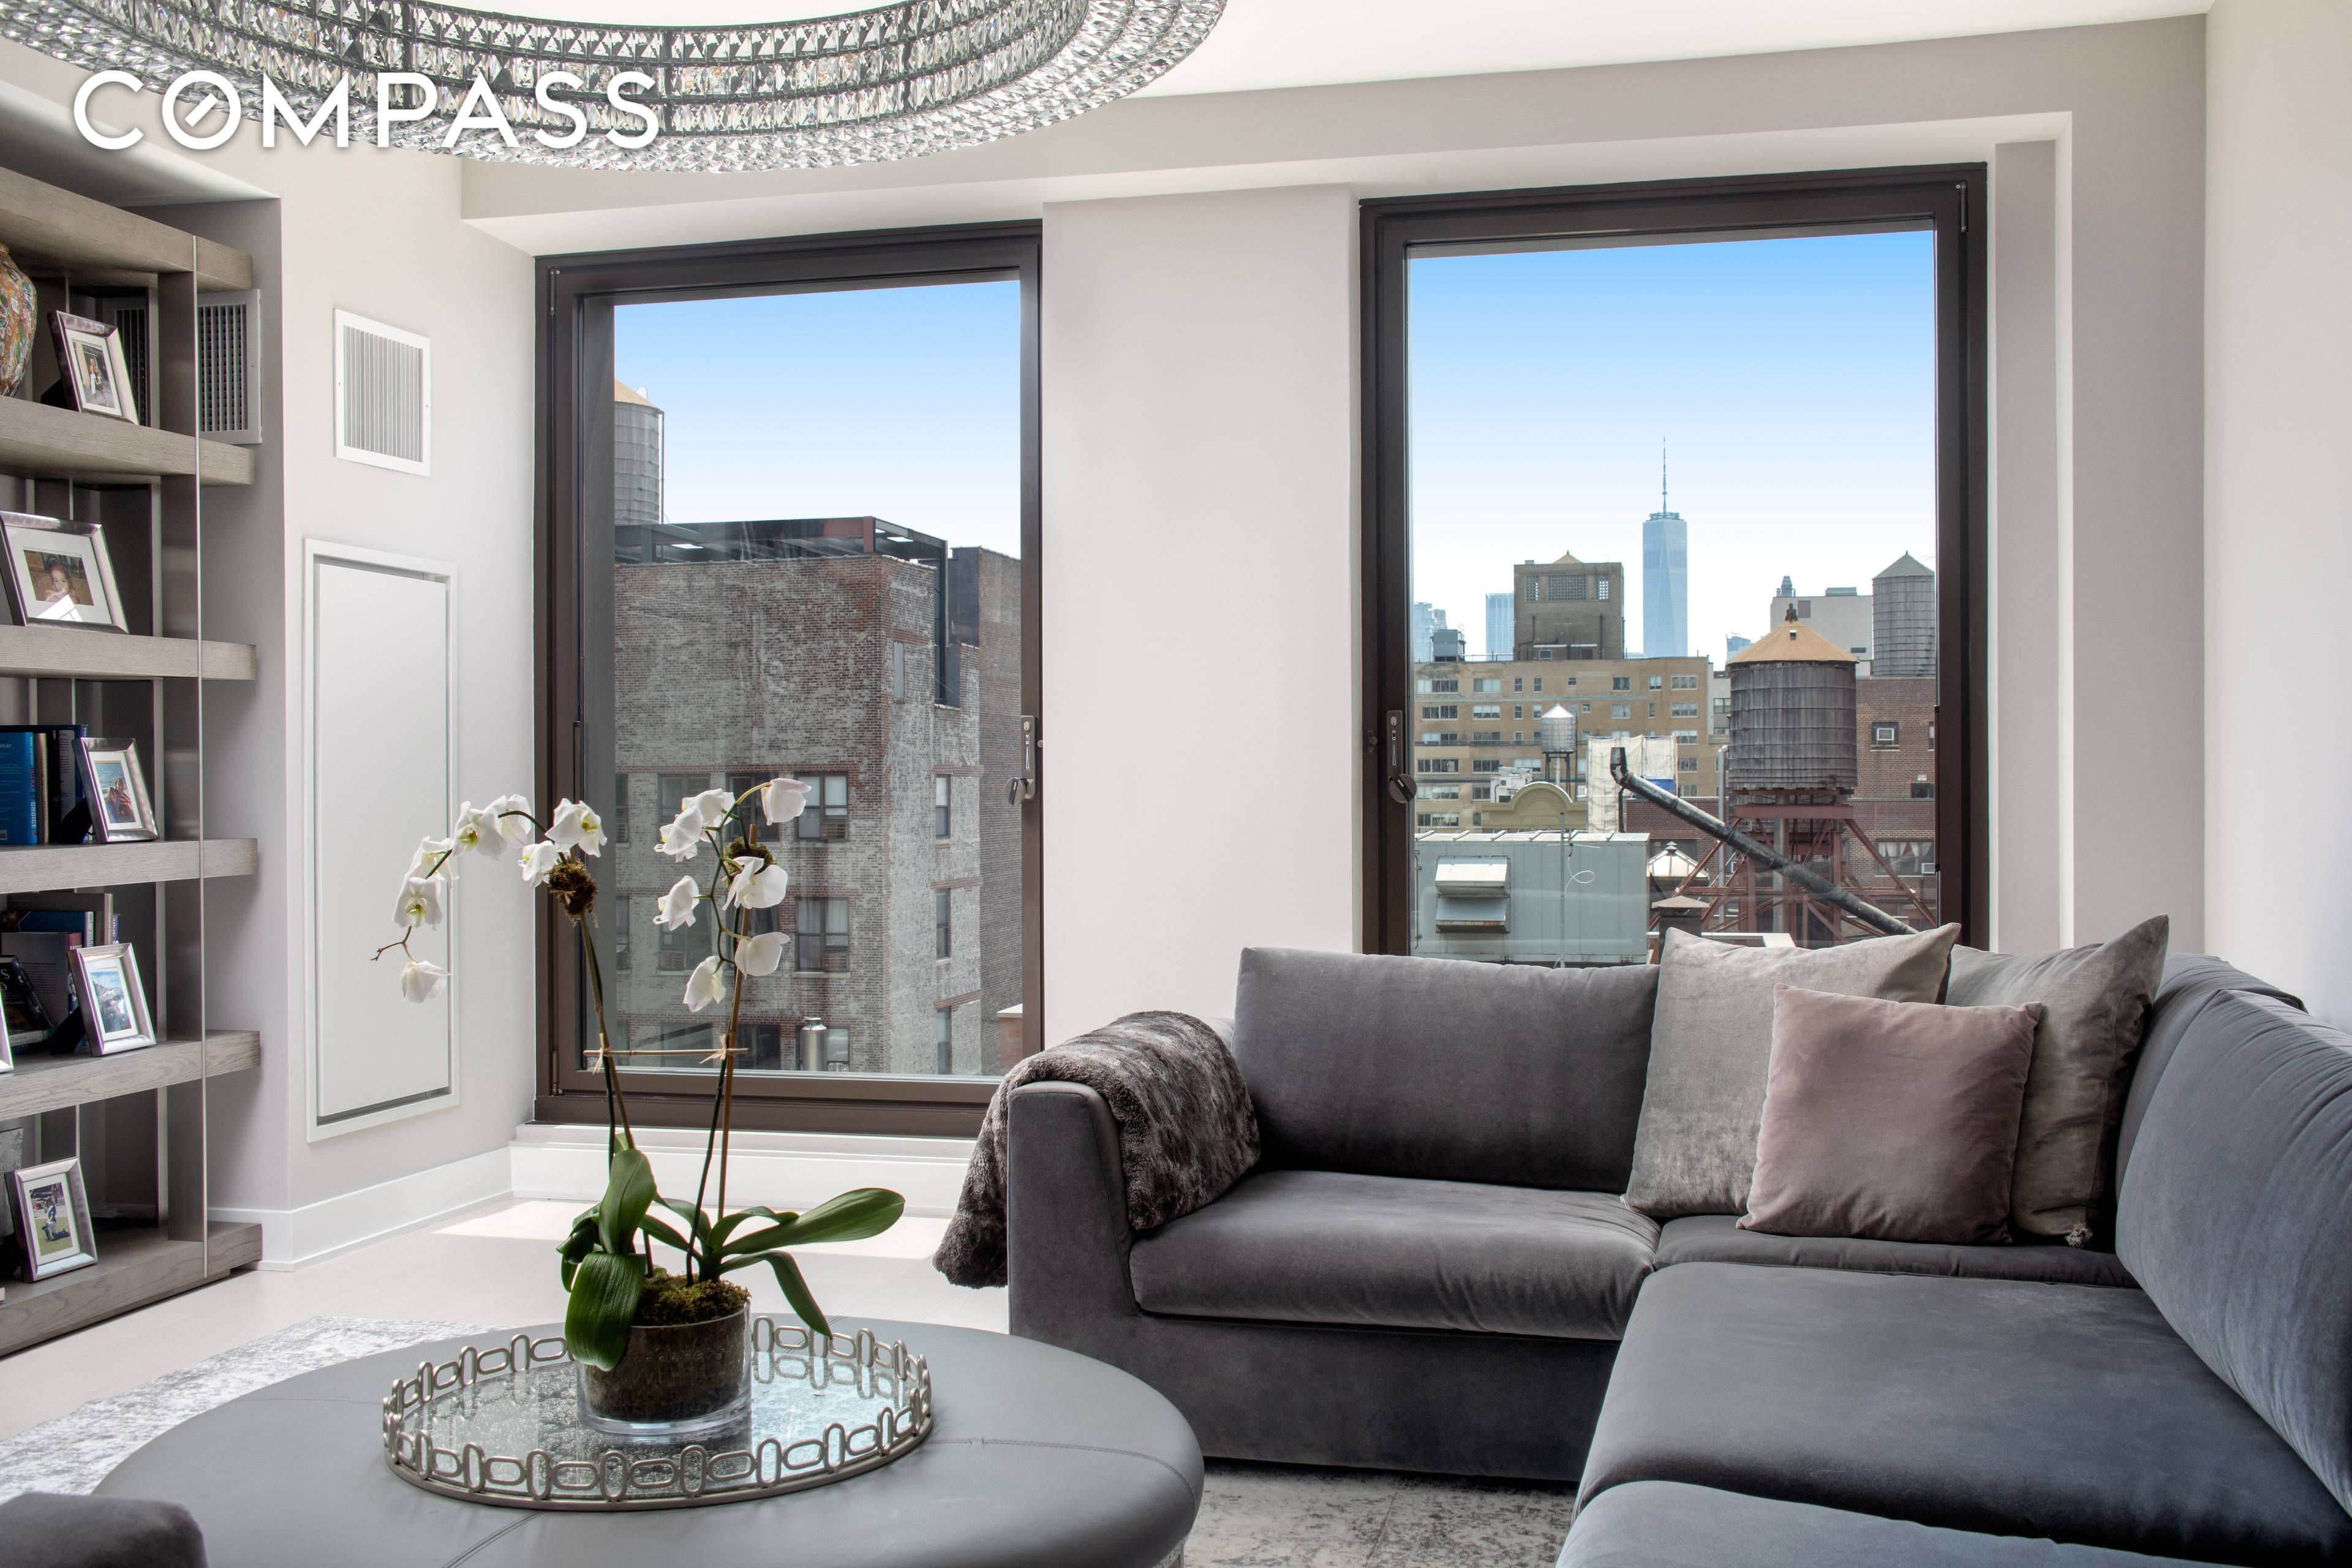 Experience luxurious living in this stunning duplex apartment located in the vibrant Flatiron district.